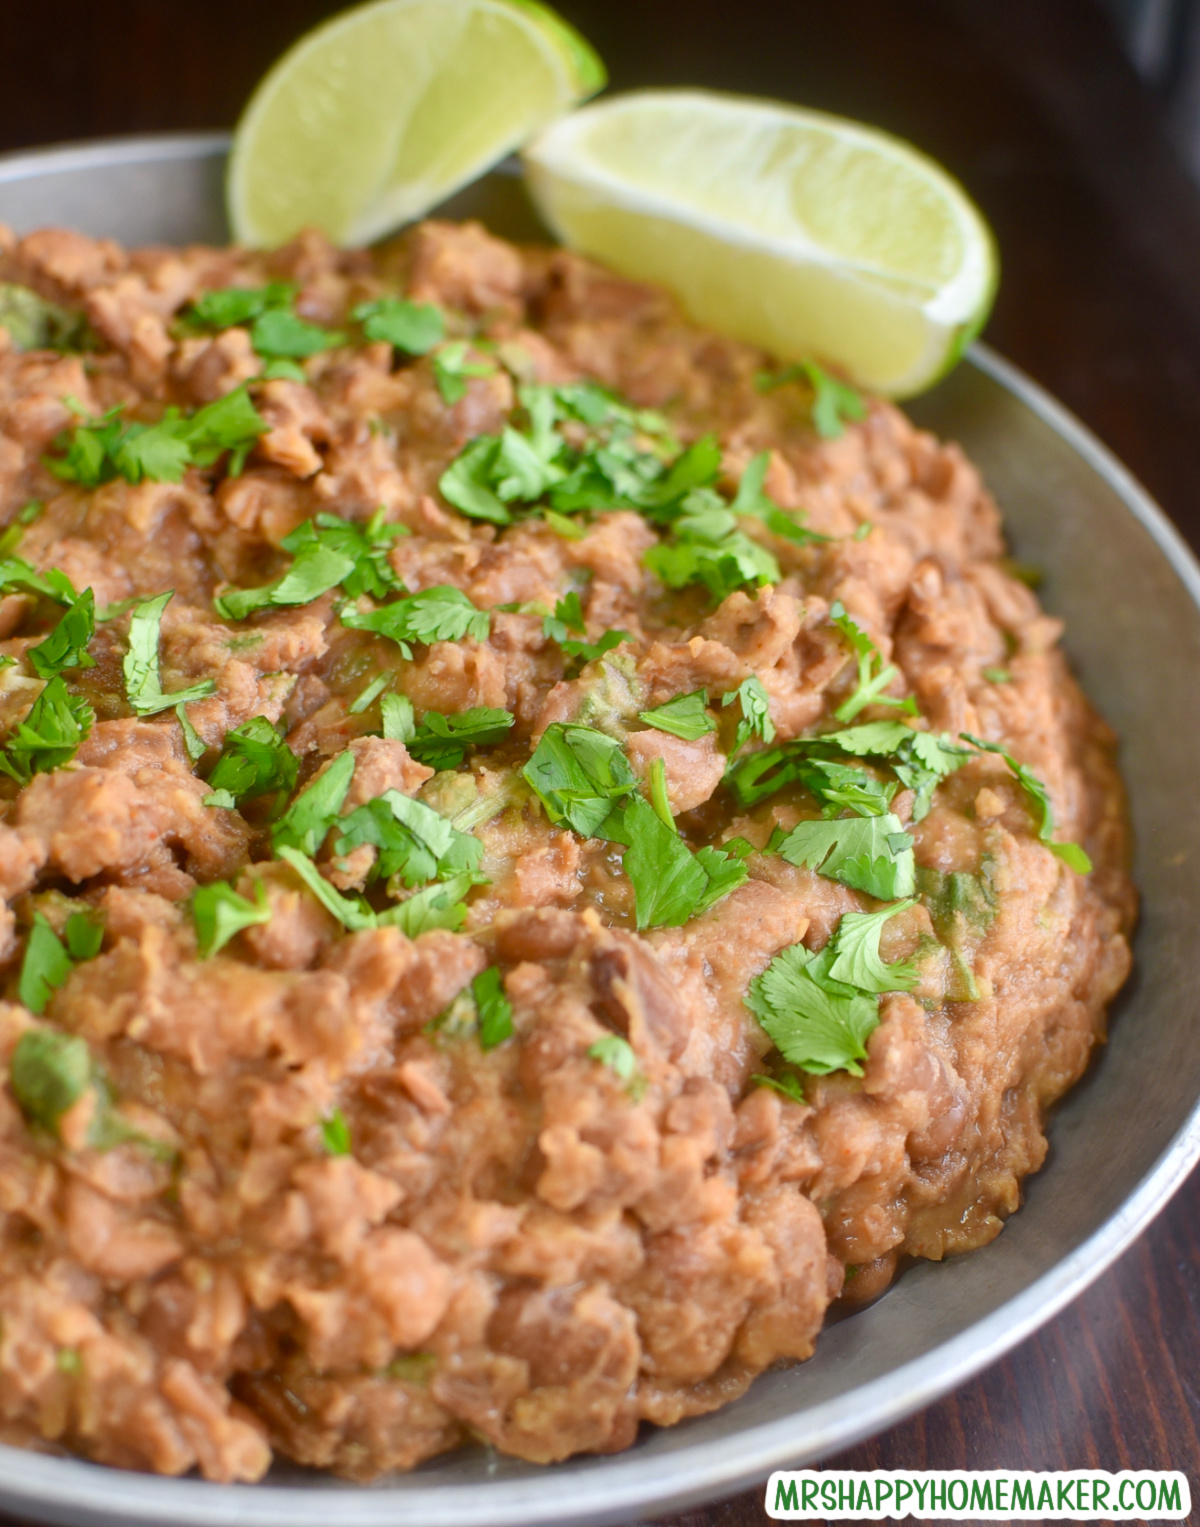 Easy homemade refried beans in a round silver bowl with 2 lime slices